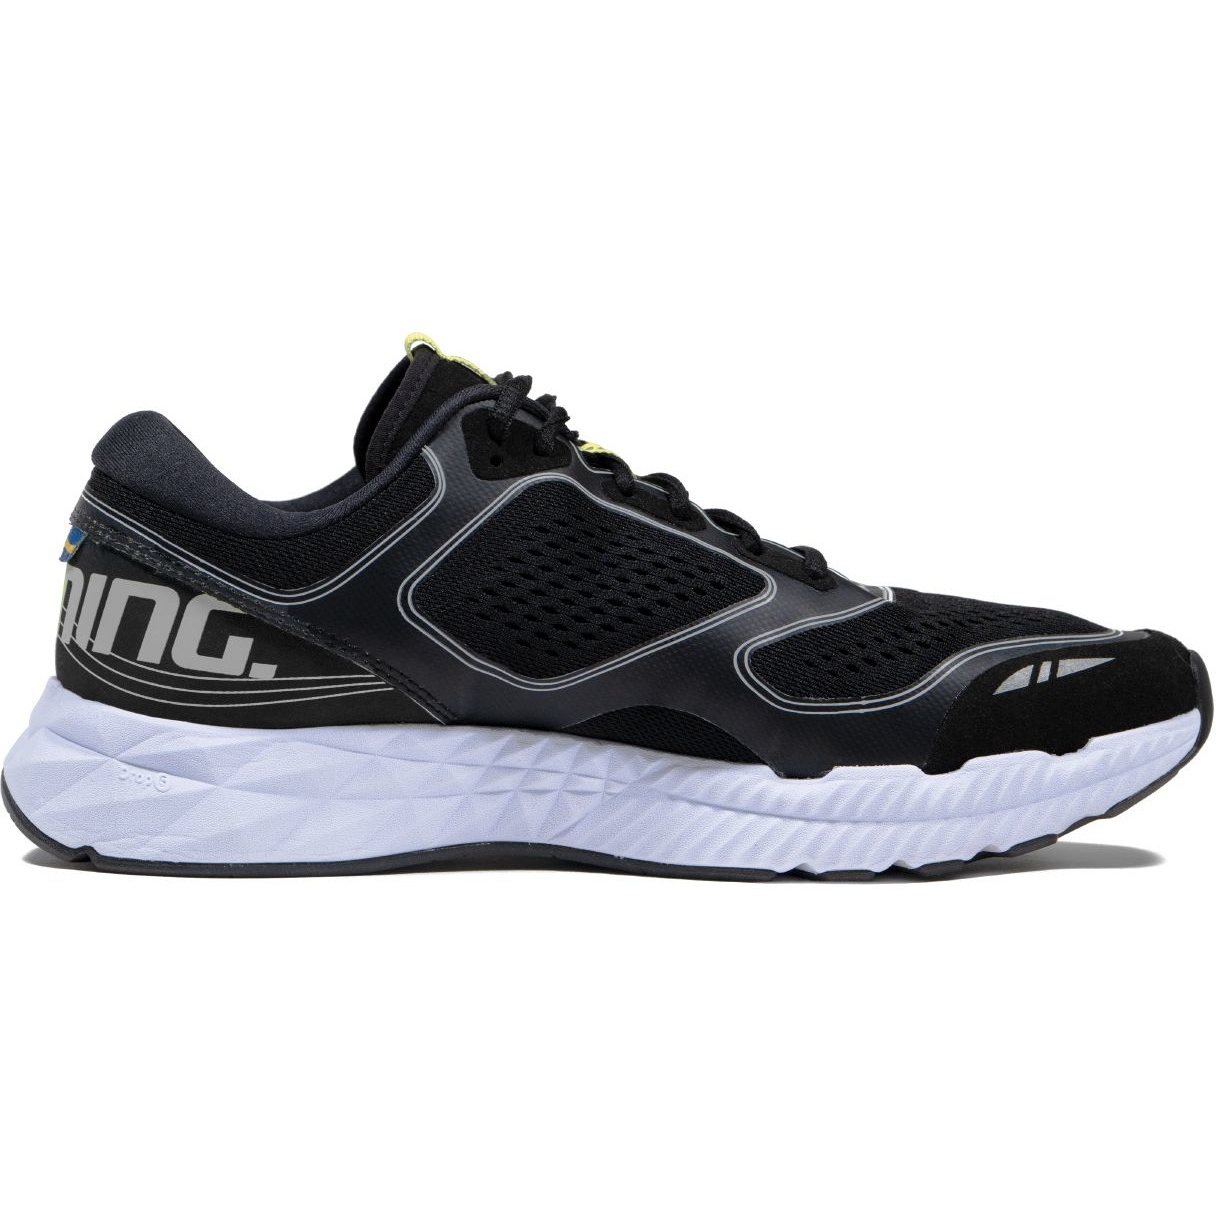 Image of Salming Recoil Warrior Shoes Men - black/white